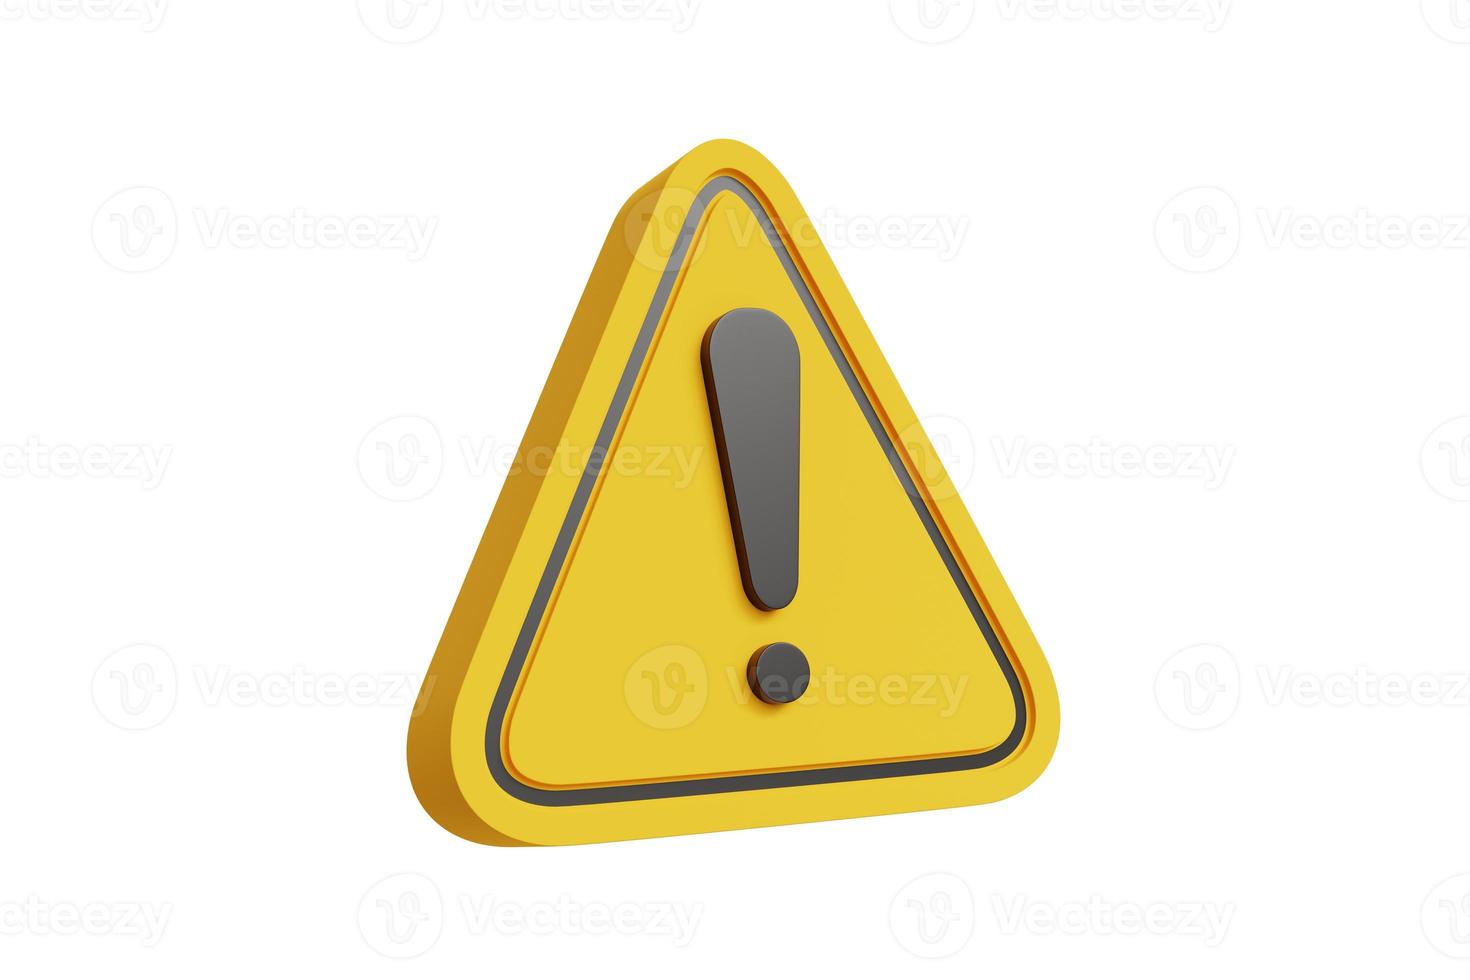 3d illustration of yellow triangle label black exclamation mark symbol isolated on background - clipping path photo